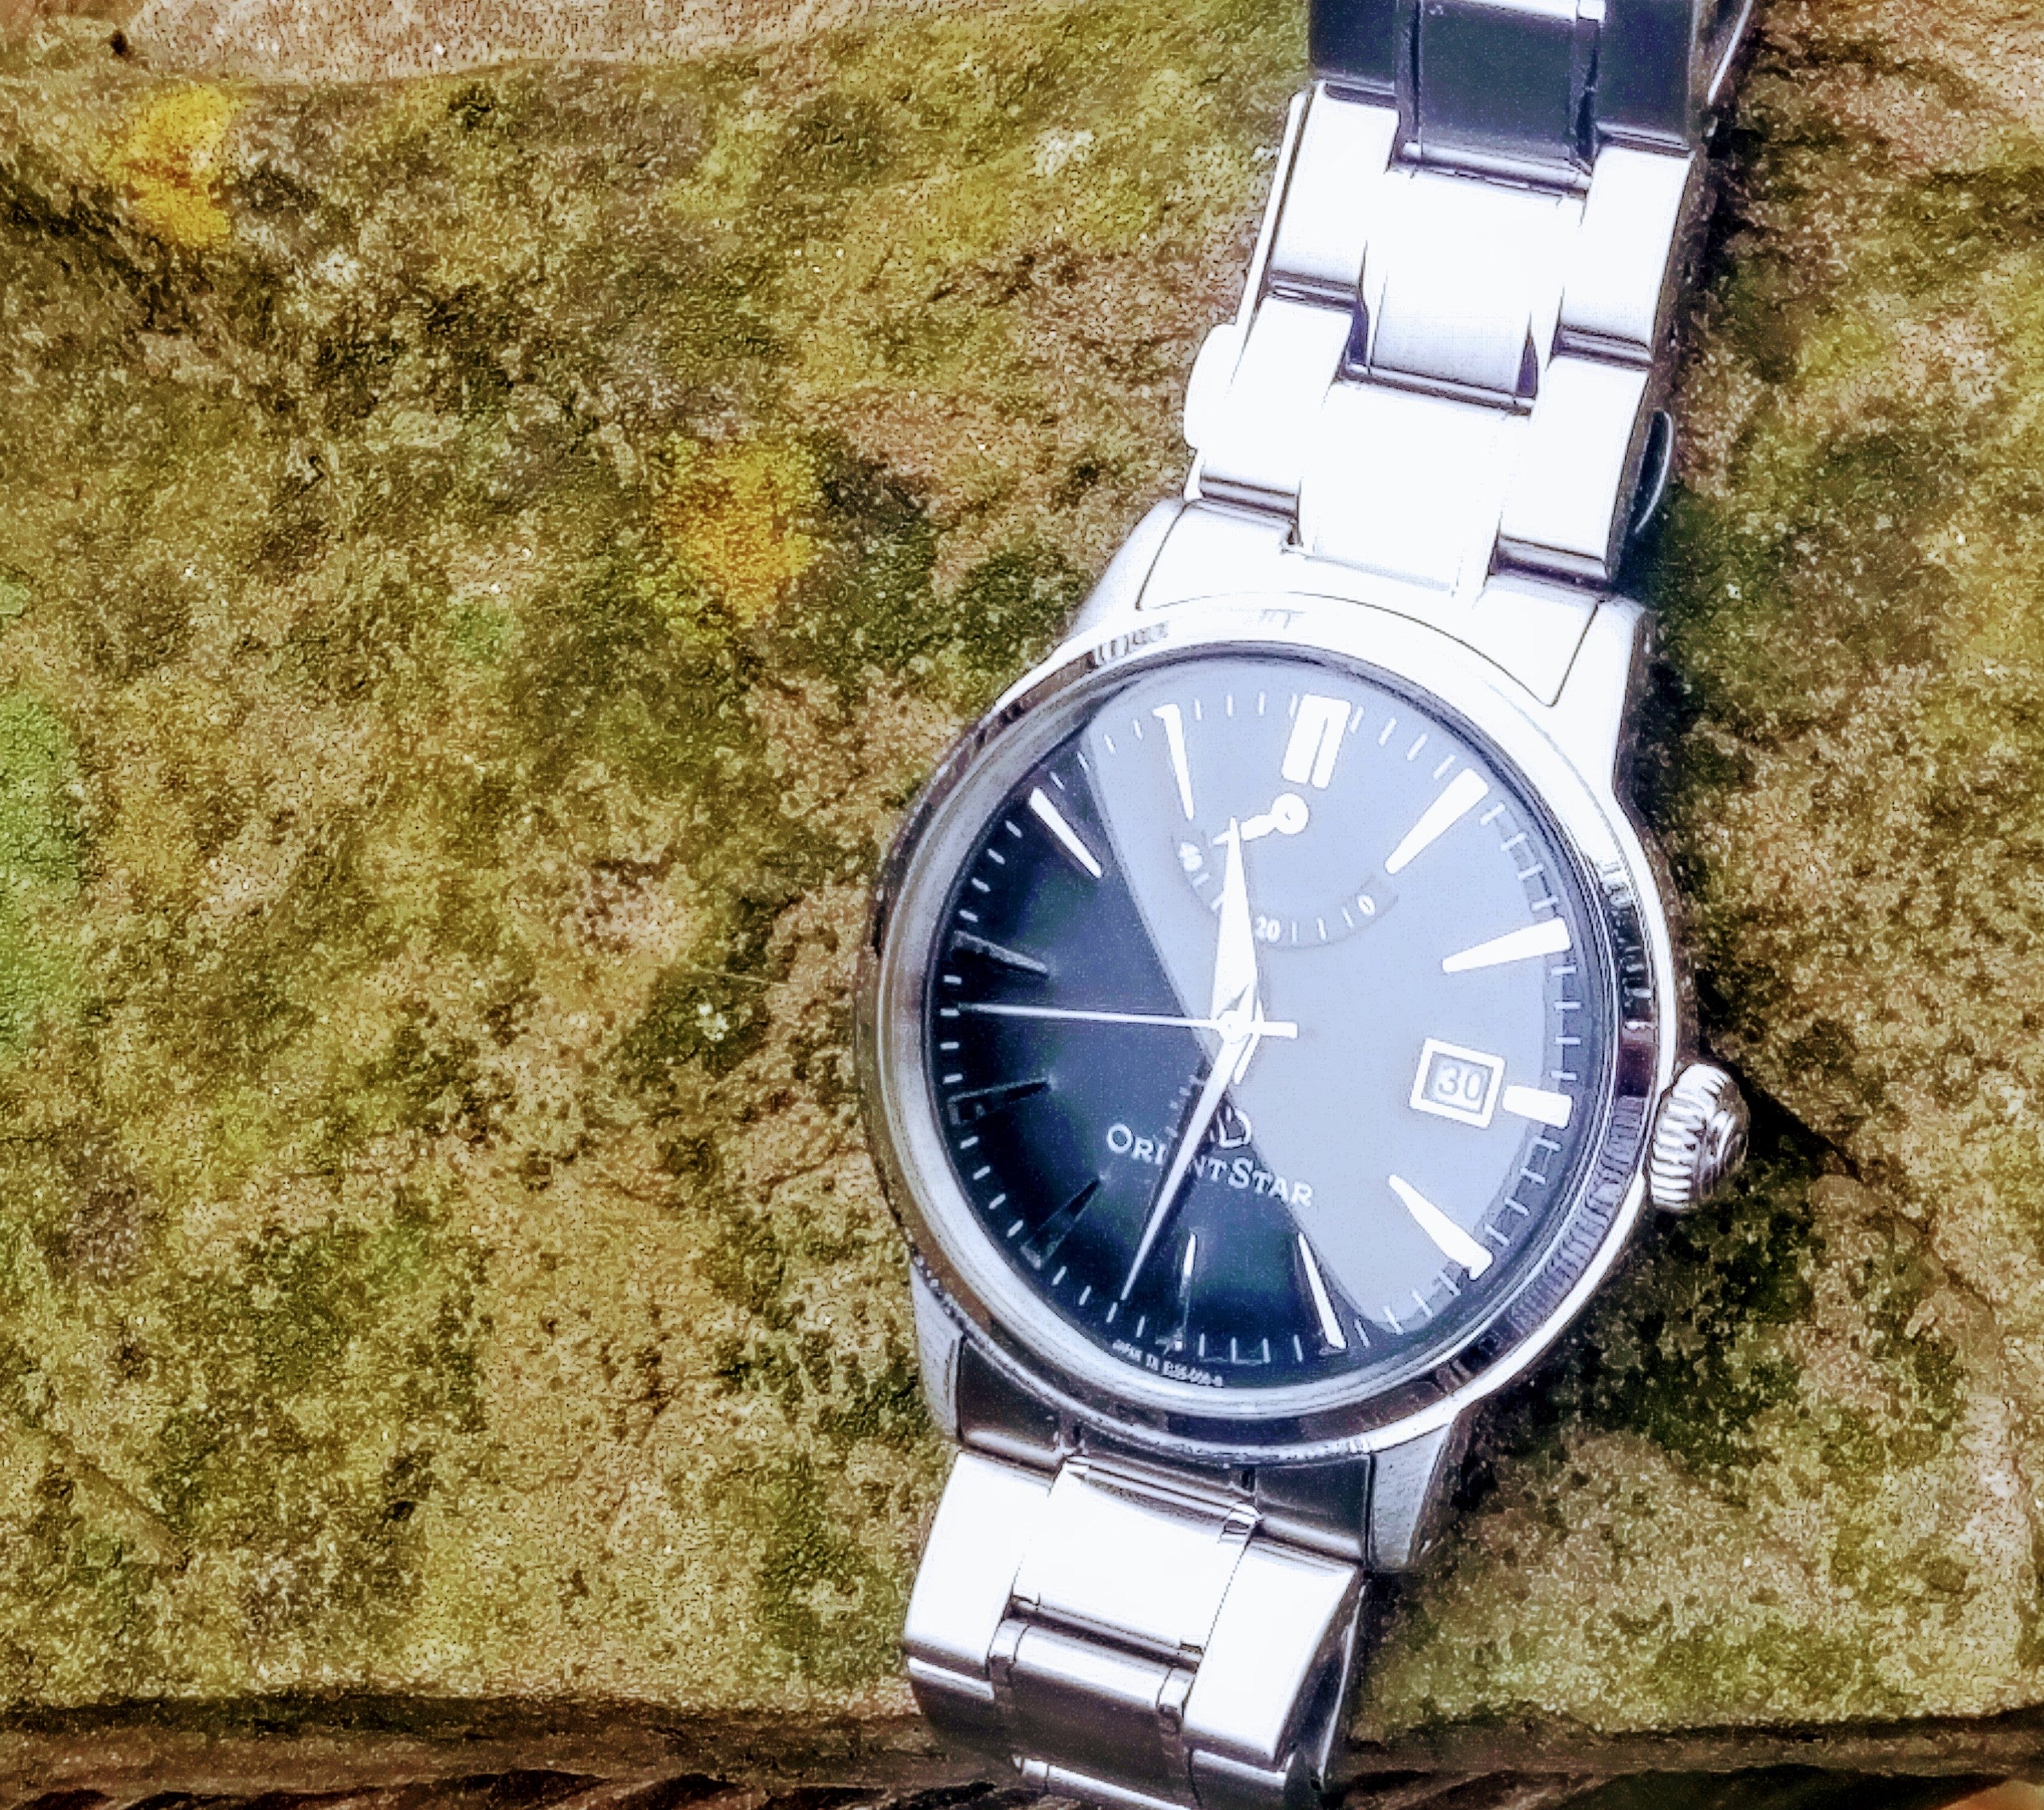 orient star vs. grand seiko thoughts | Page 2 | WatchUSeek Watch Forums